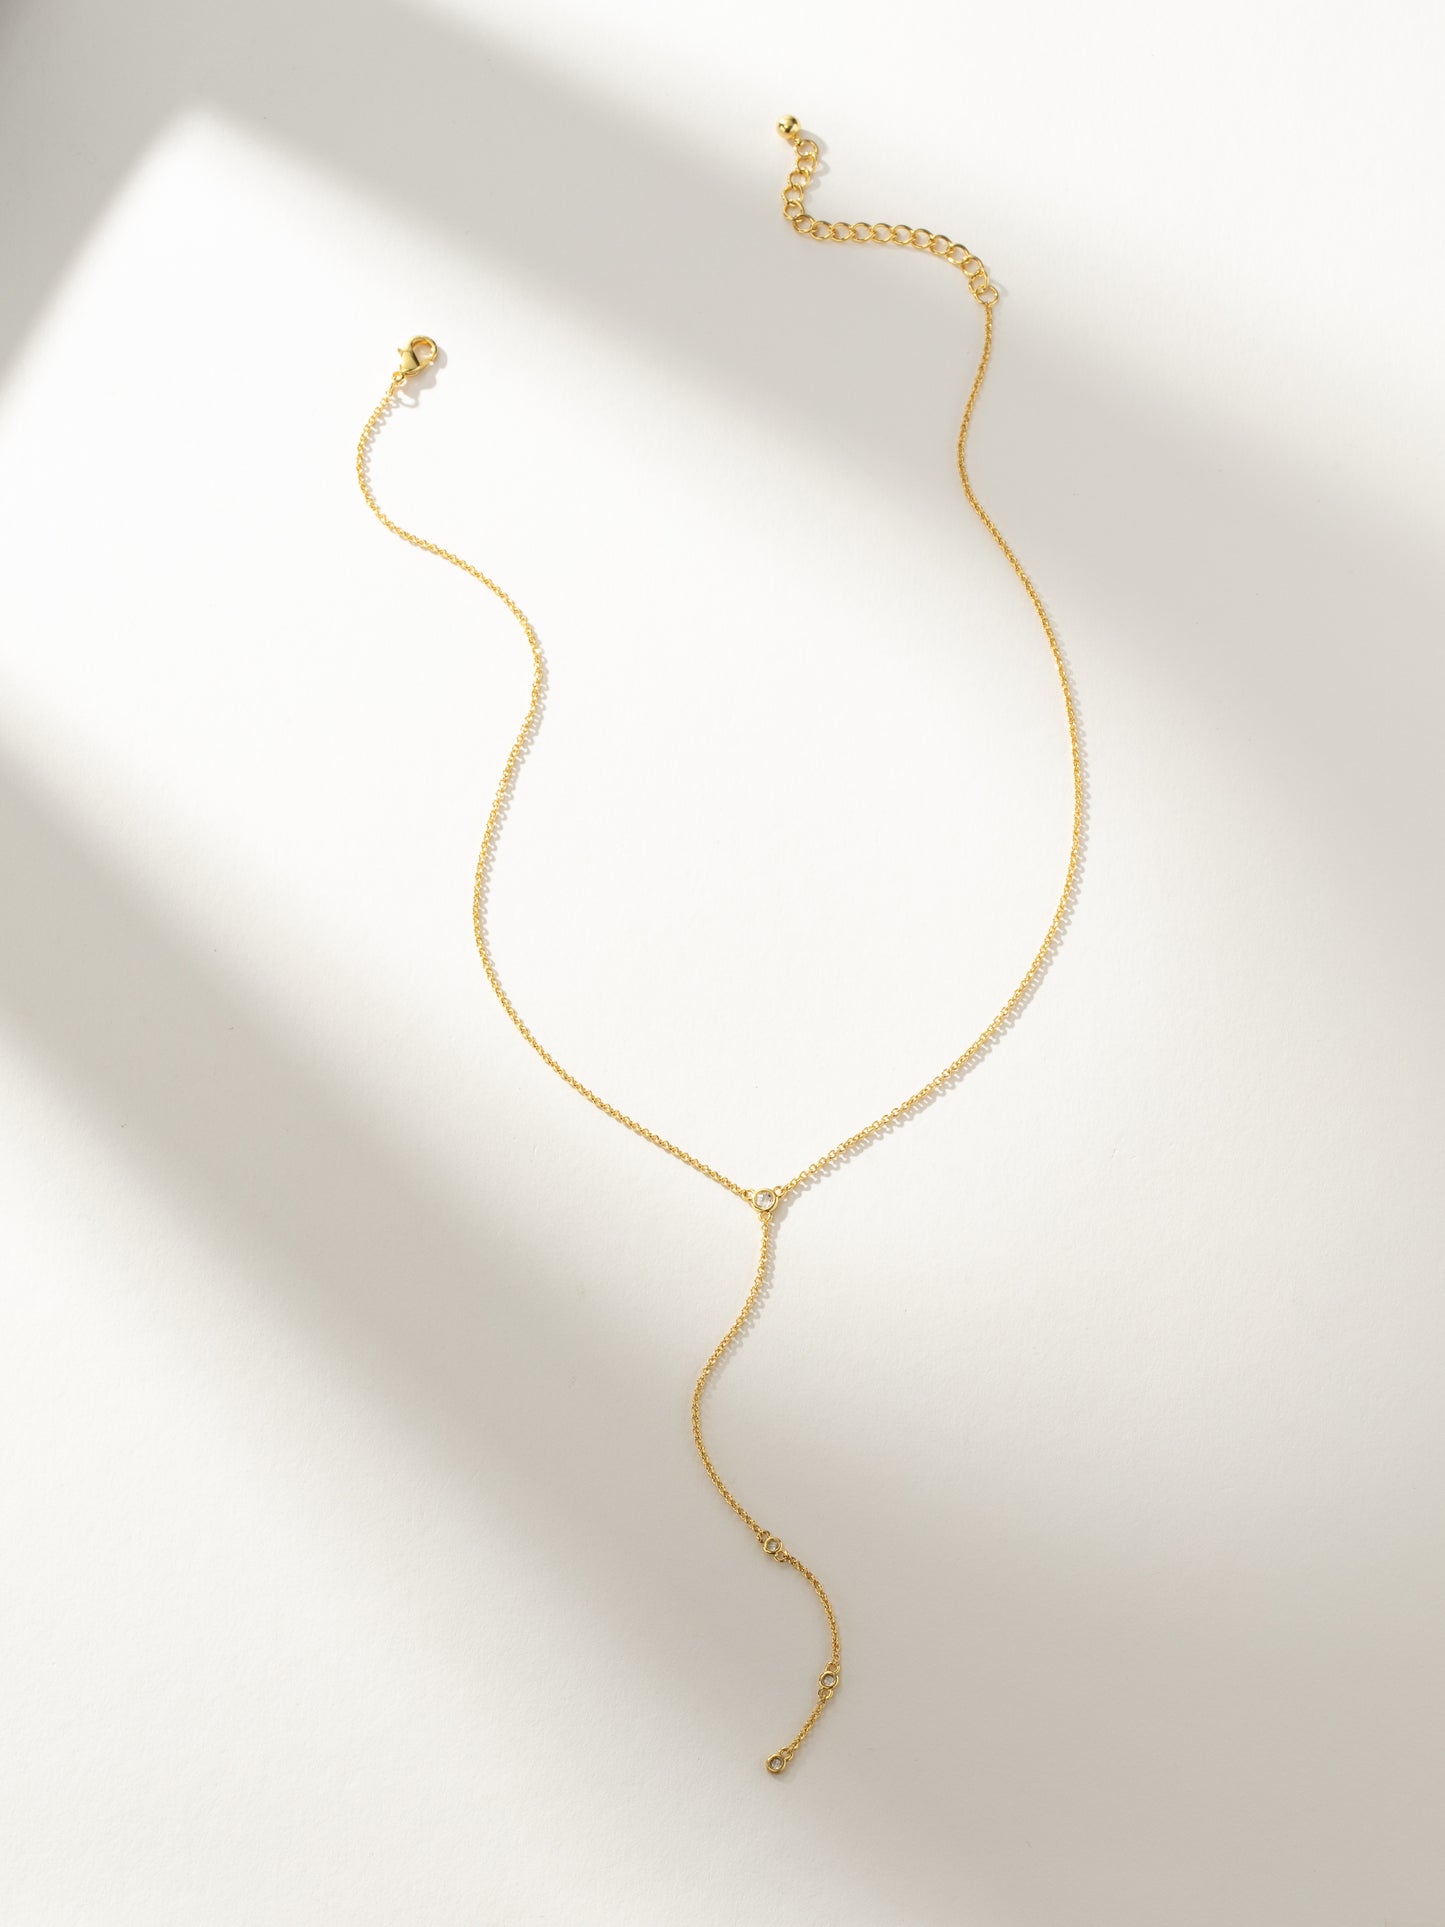 Soft Touch Lariat Necklace | Gold | Product Image | Uncommon James